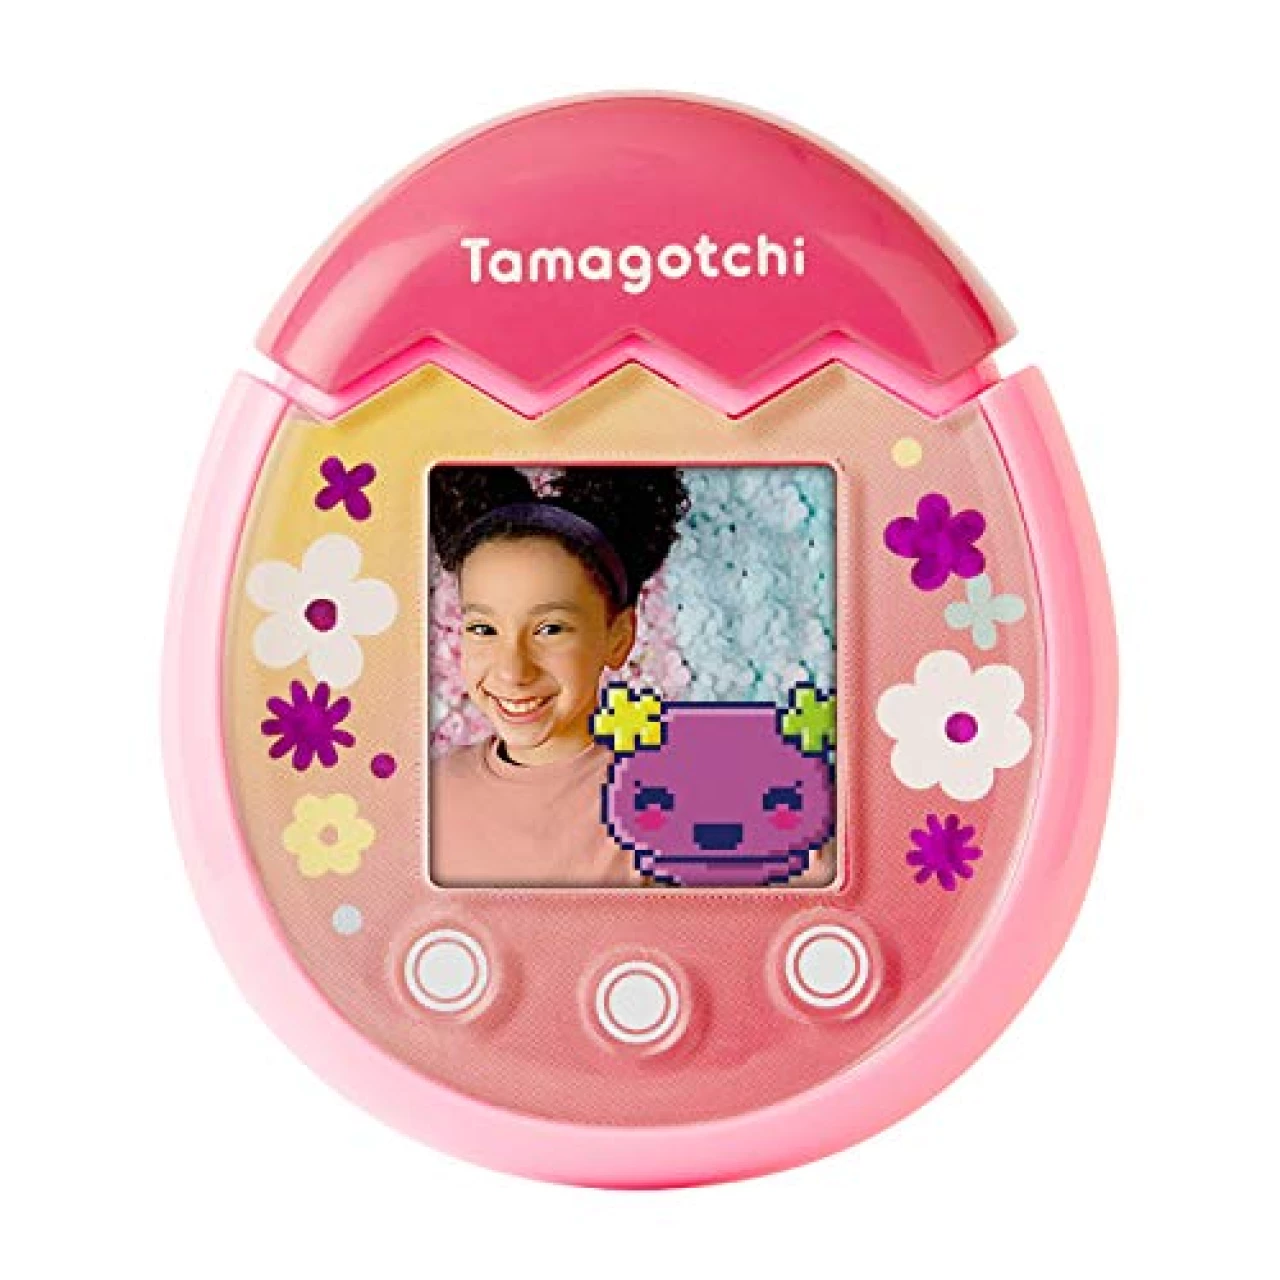 Tamagotchi Pix - Floral (Pink) (42901) For 6-99 Years, Includes Electronic Pet